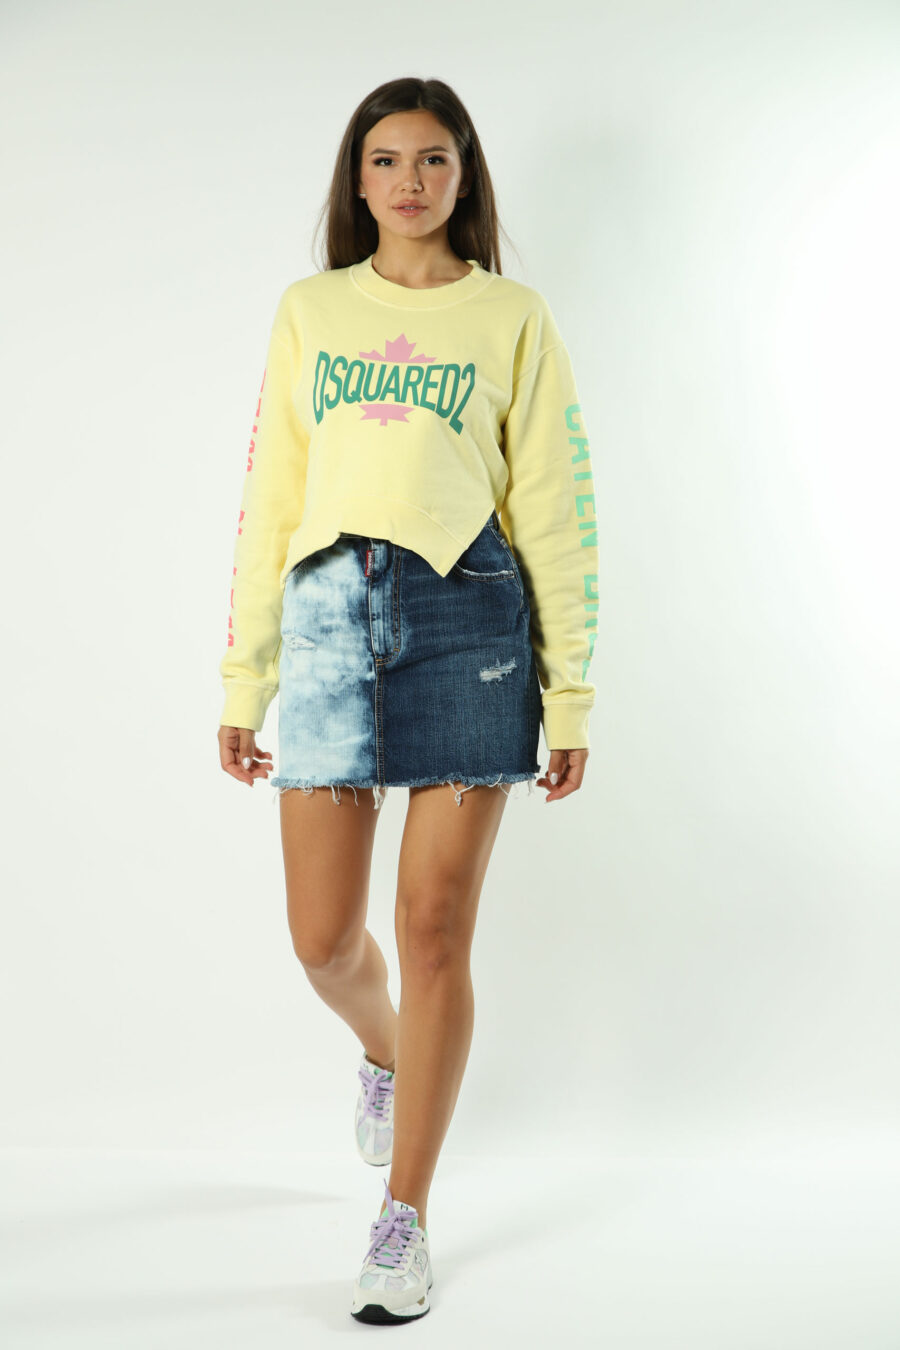 Yellow sweatshirt with green maxilogo and text on sleeves - 8052134554463 4